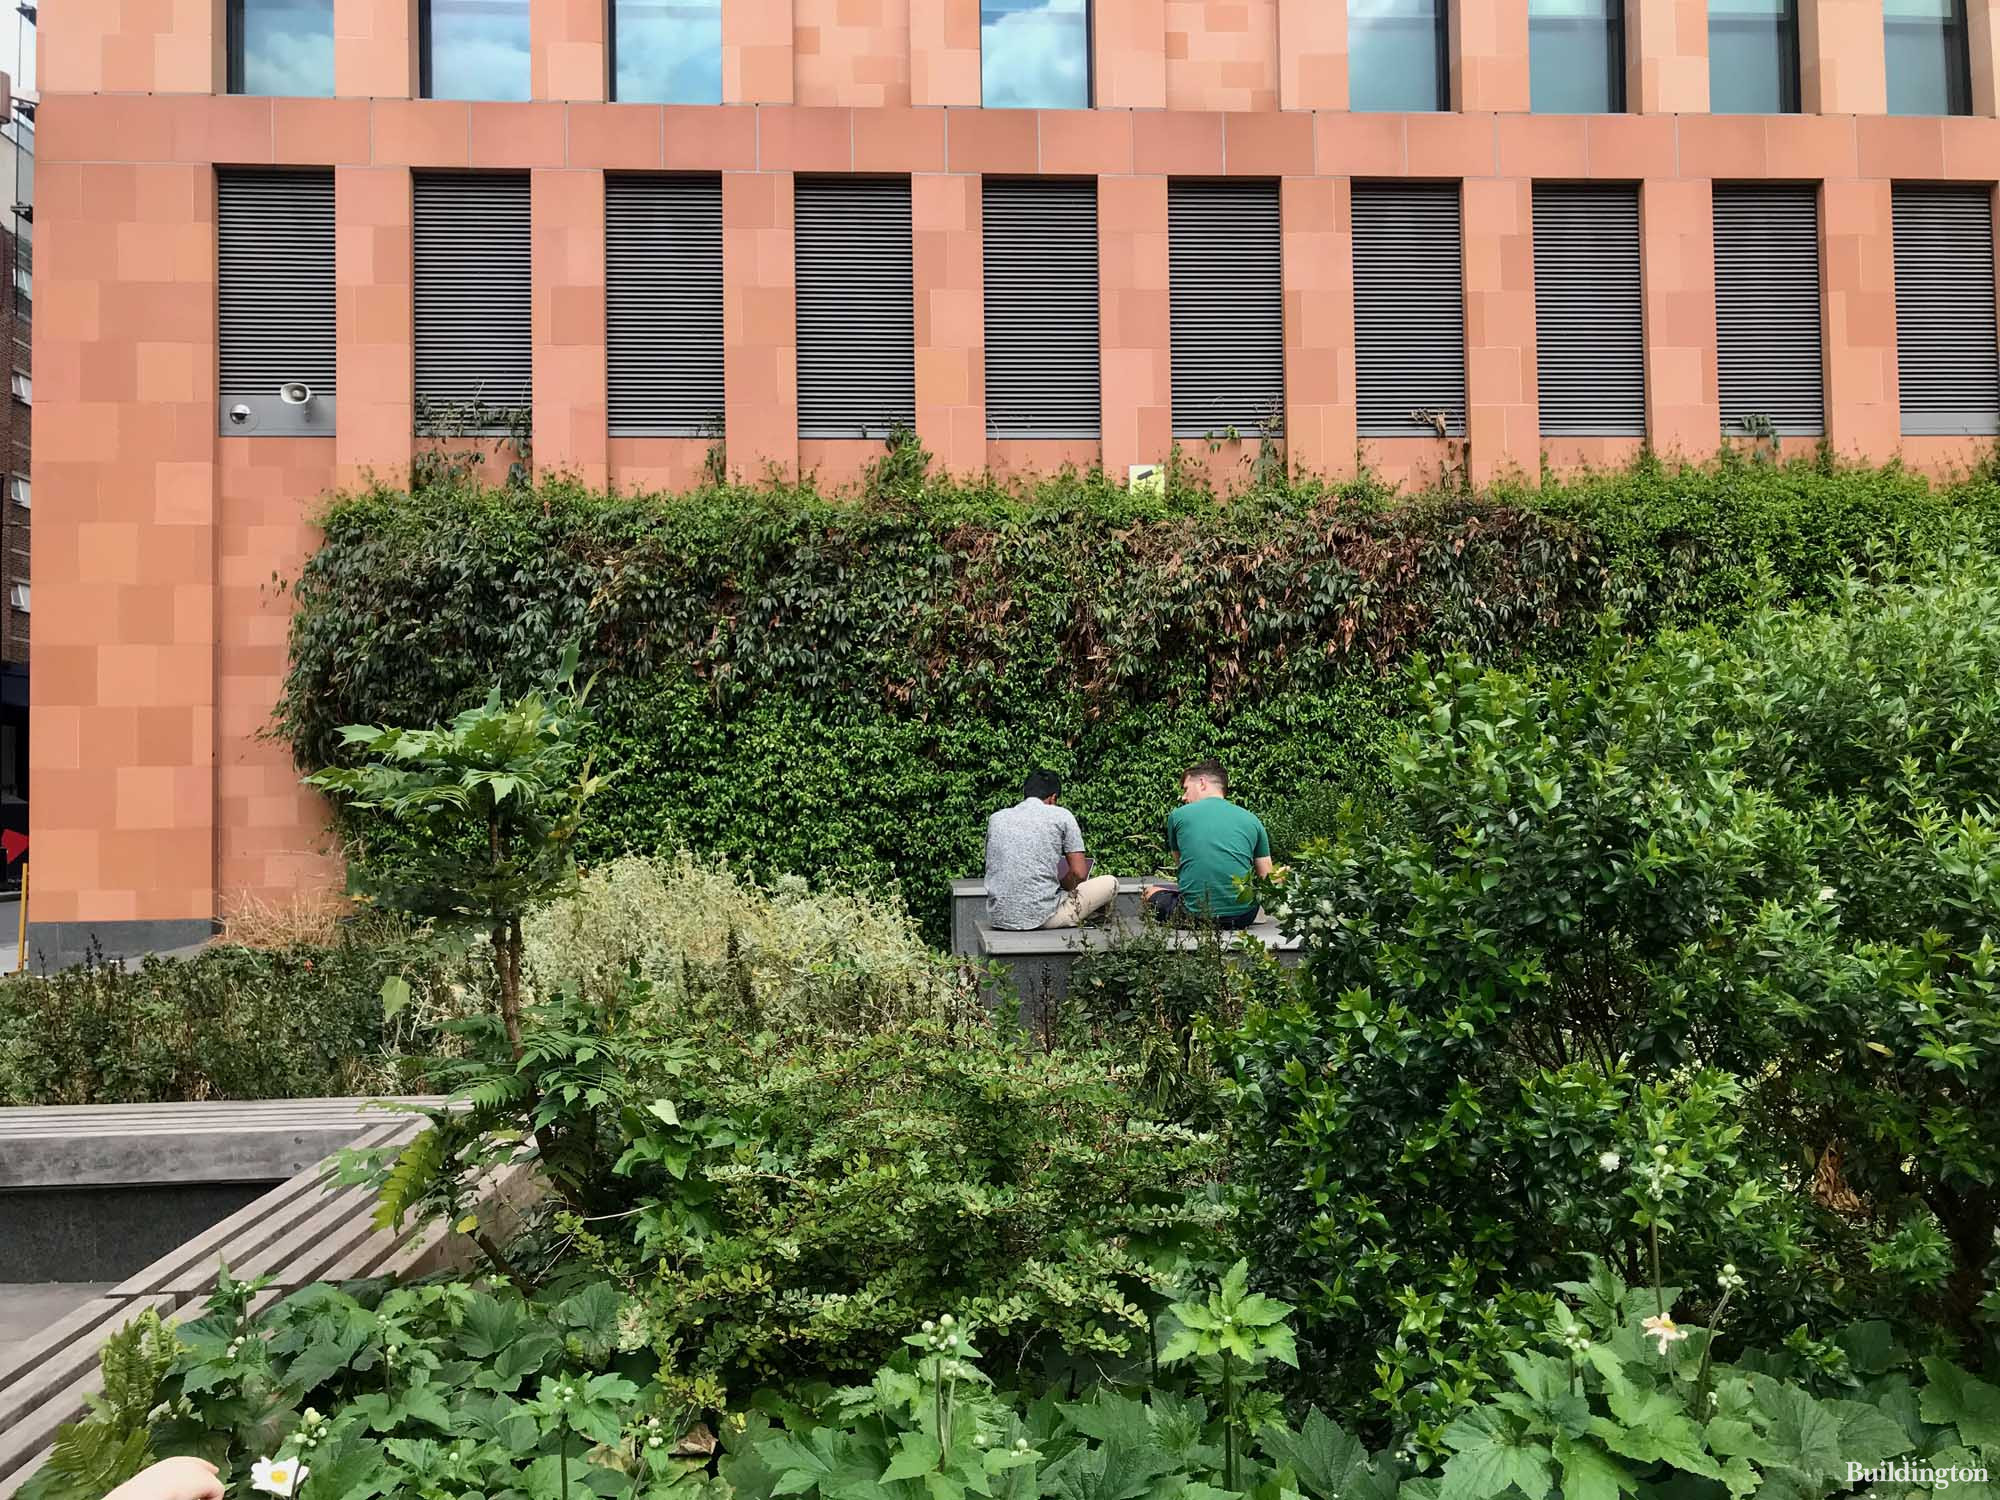 The landscaped area next to Francis Crick Institute on Ossulston Street.